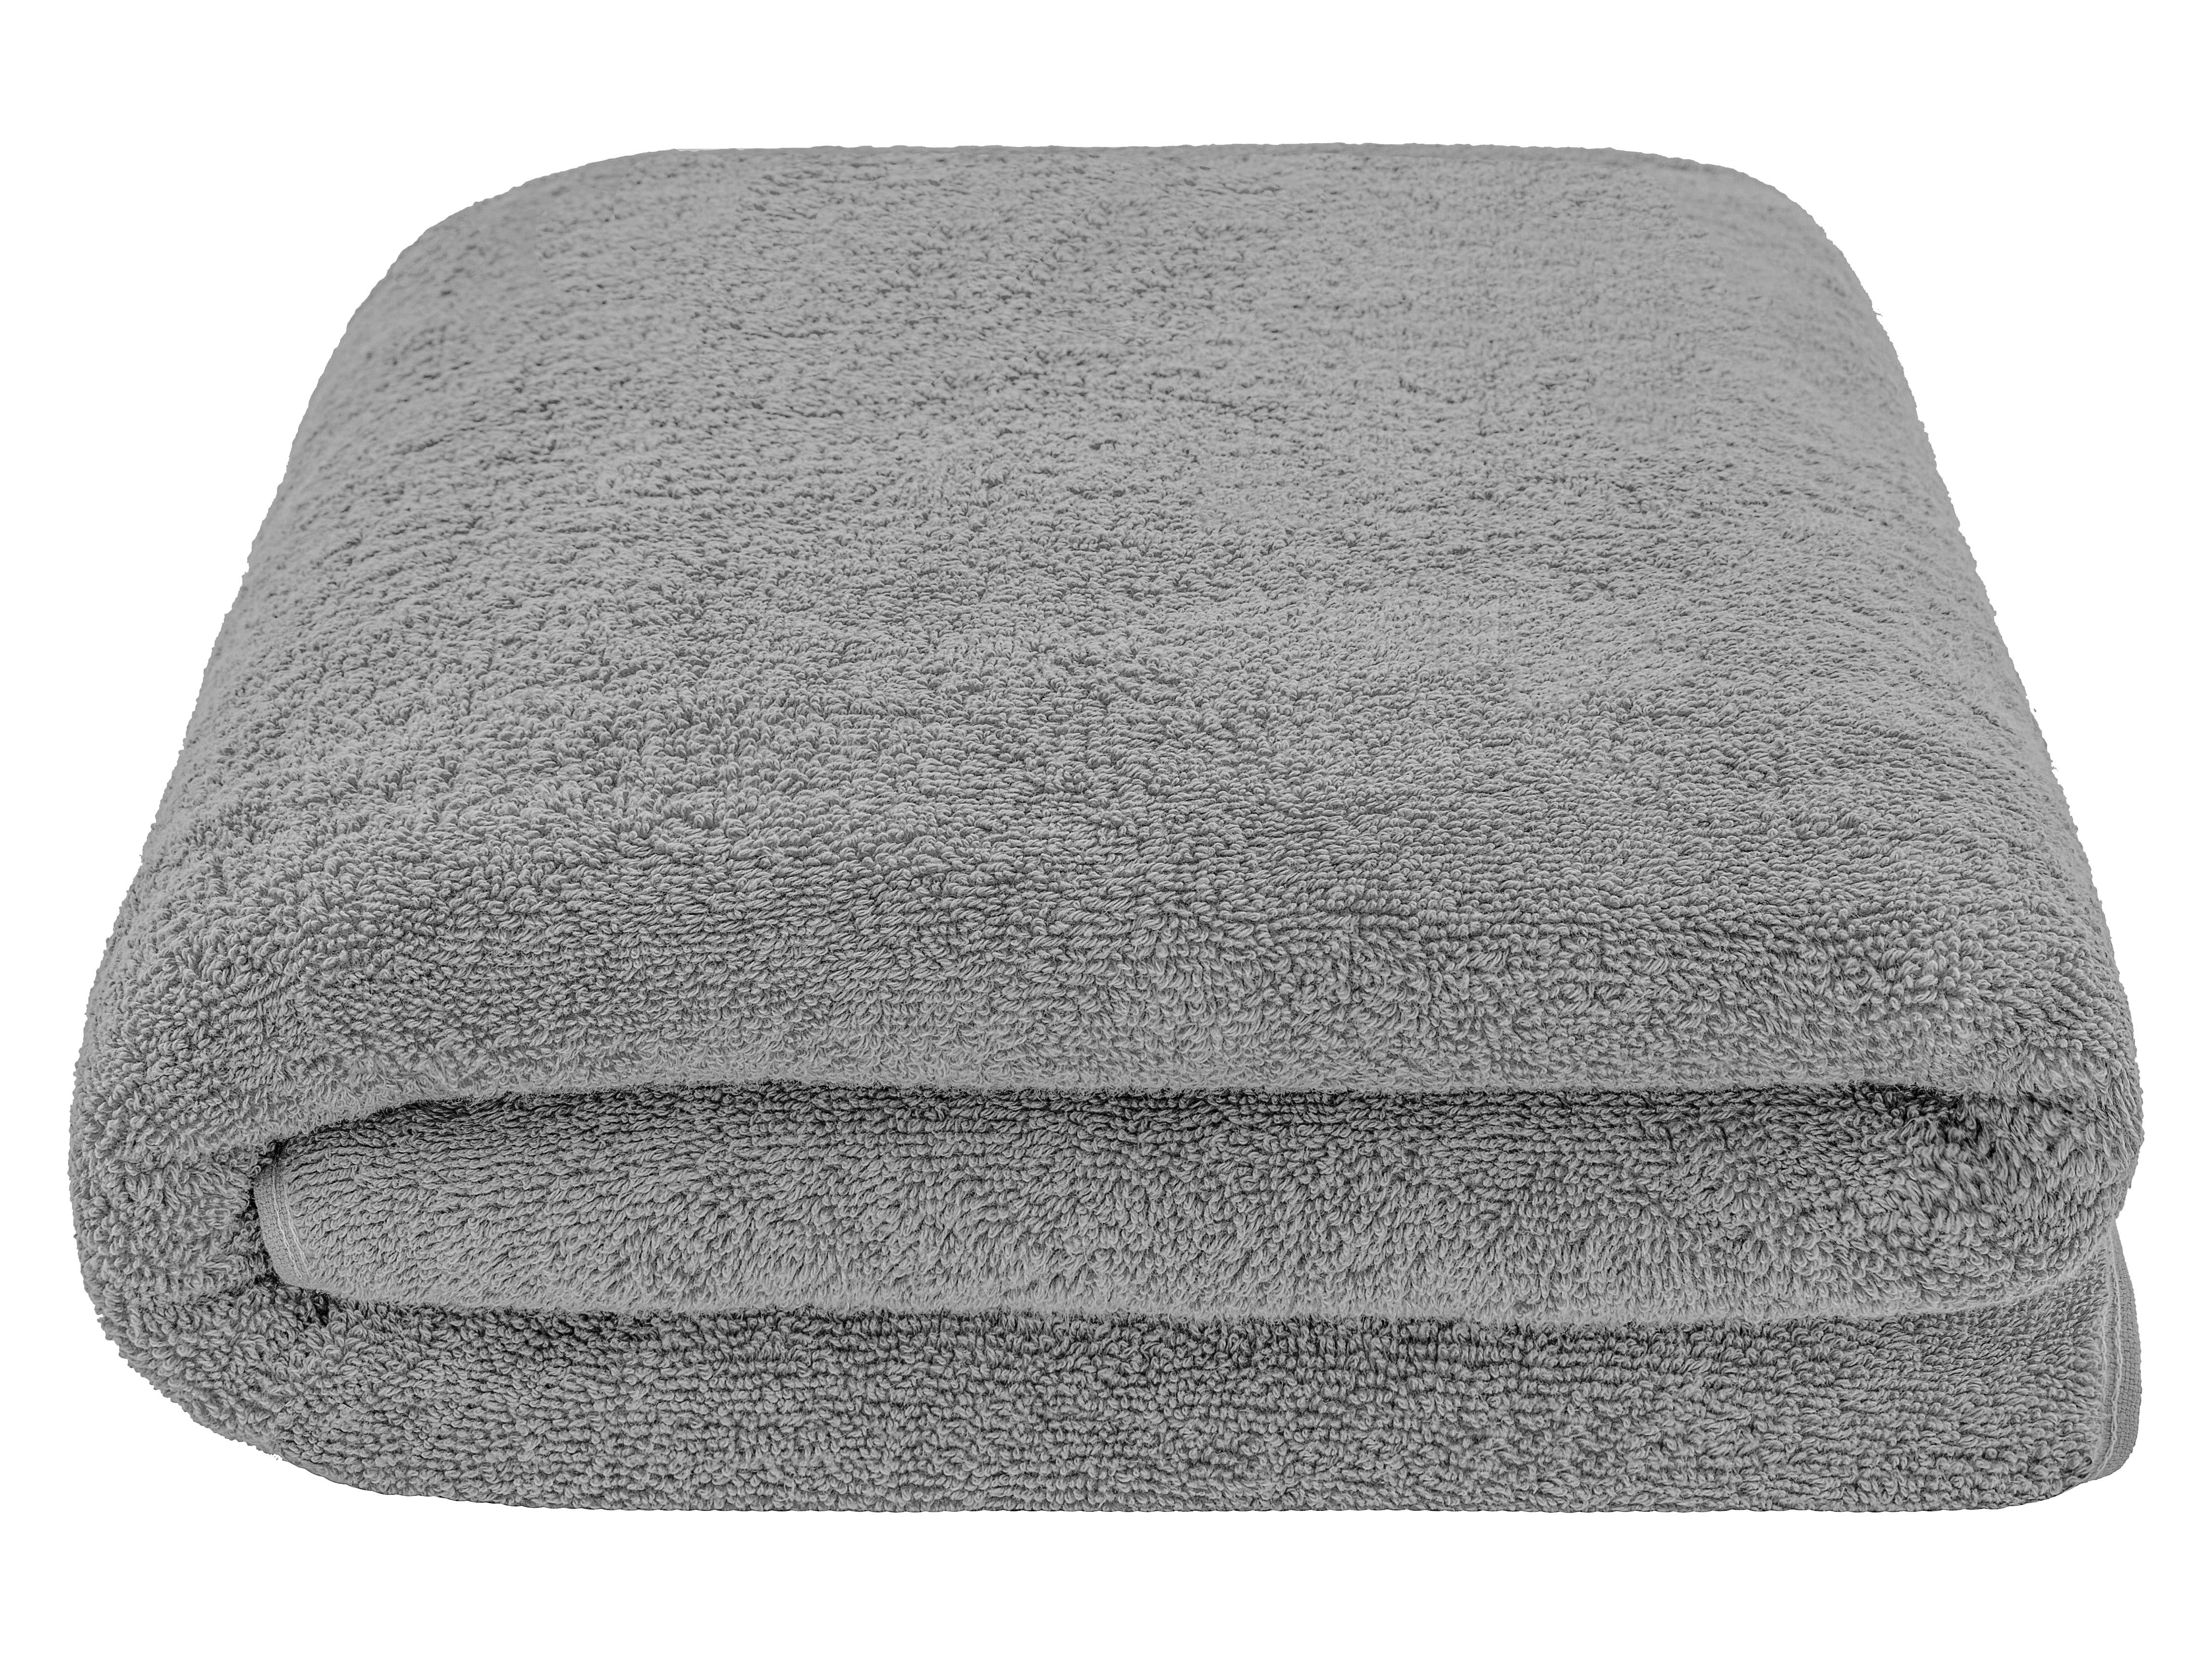 Extra Large Oversized Bath Towels, 100% Cotton Turkish Towels, Grey, 35x80  inch - Maximum Softness and Absorbency Bath Sheet, Heavy Weight 1000 Grams